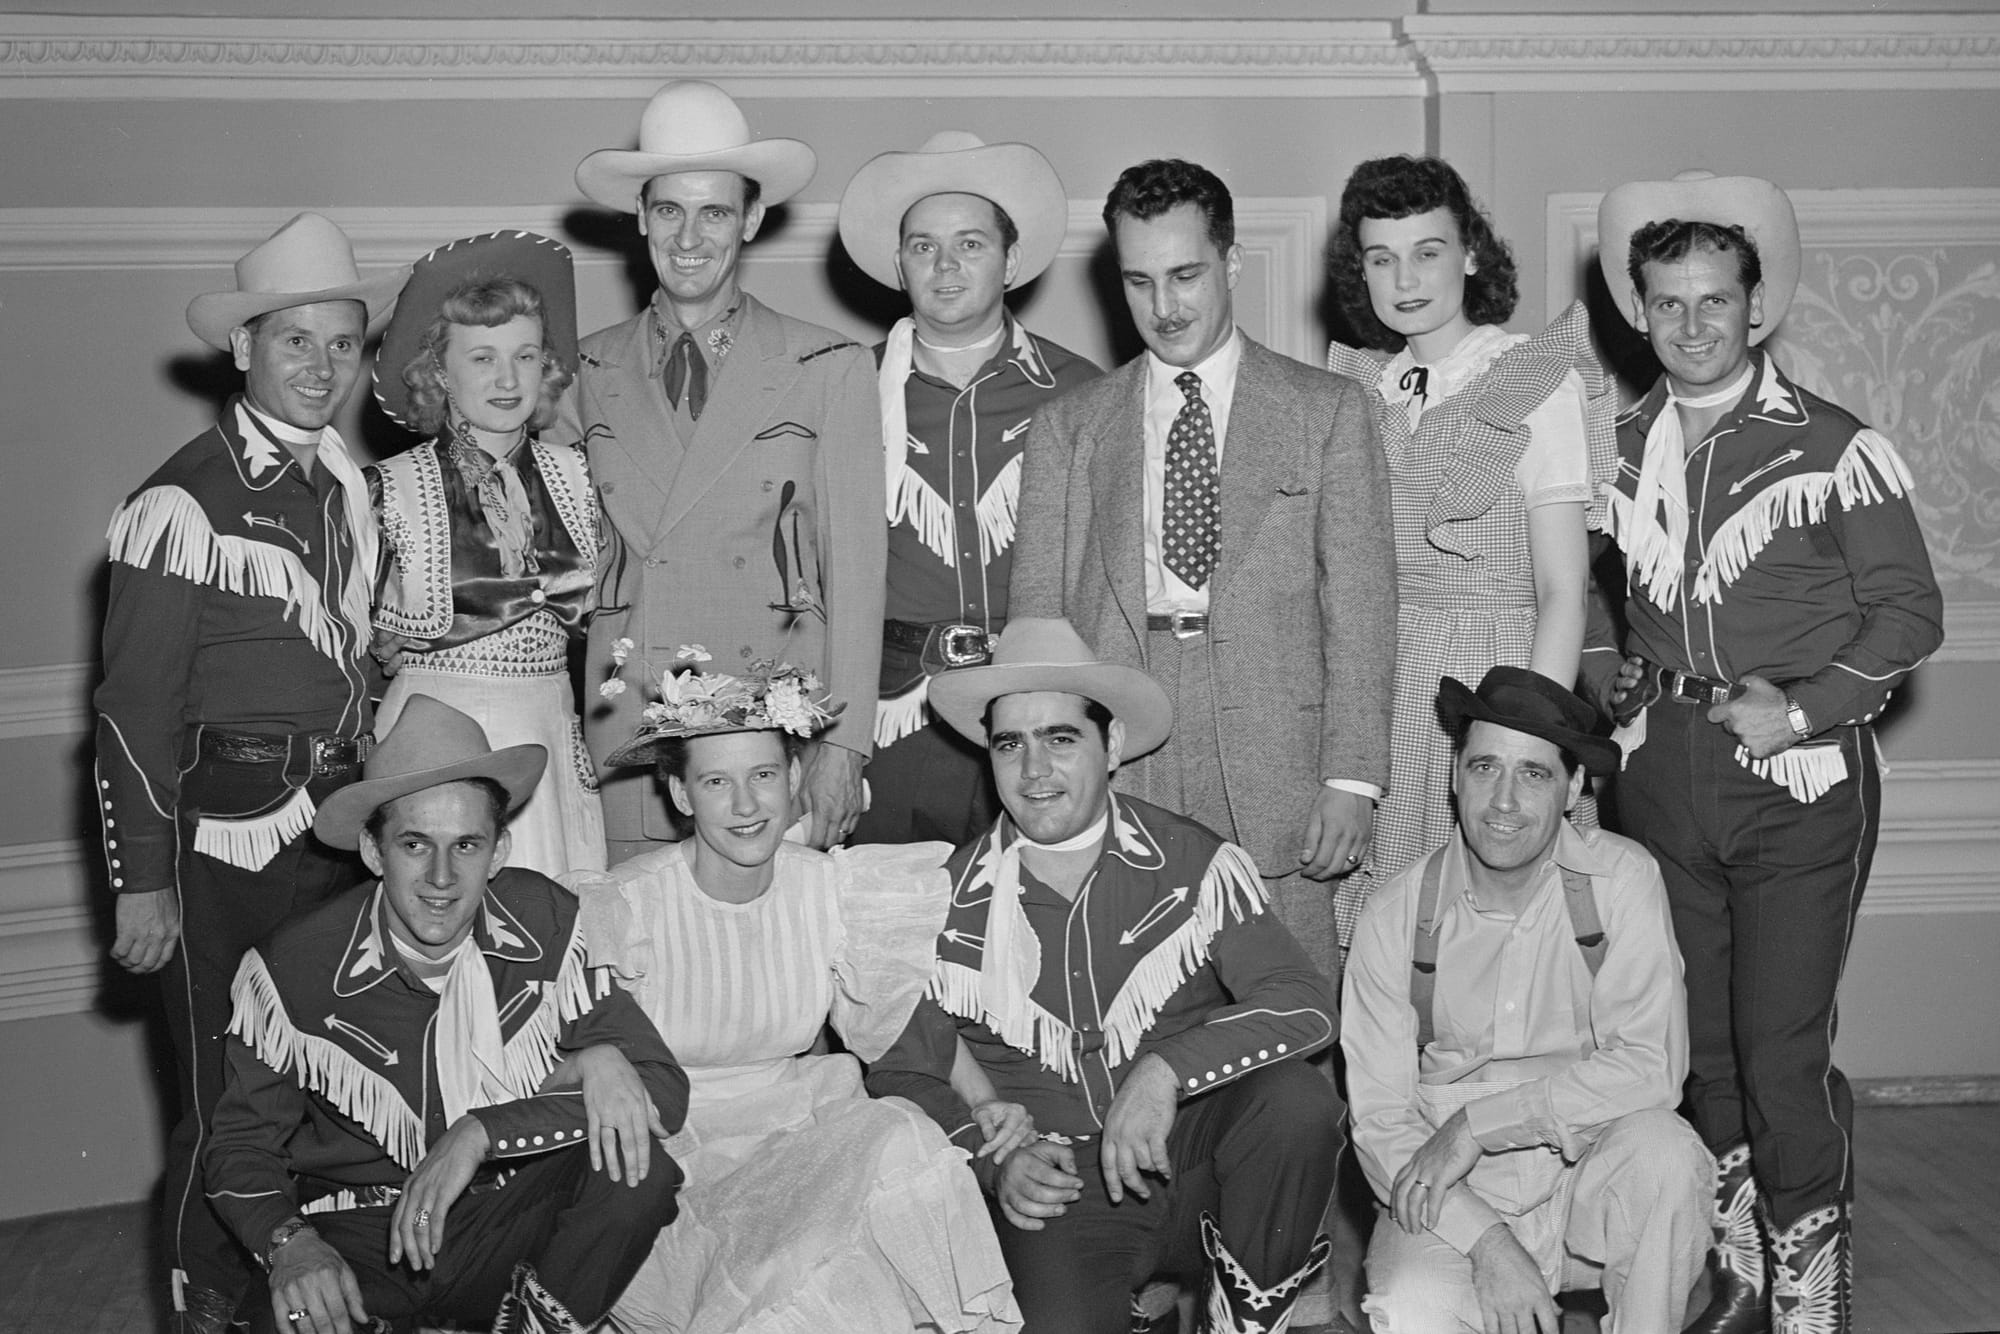 Black and white photo shows eleven country music stars of 1947, all in fancy cowboy and cowgirl regalia, including fringed shirts, kerchiefs and intricately tooled leather boots; Minnie Pearl in flowered hat and shirtwaist among them